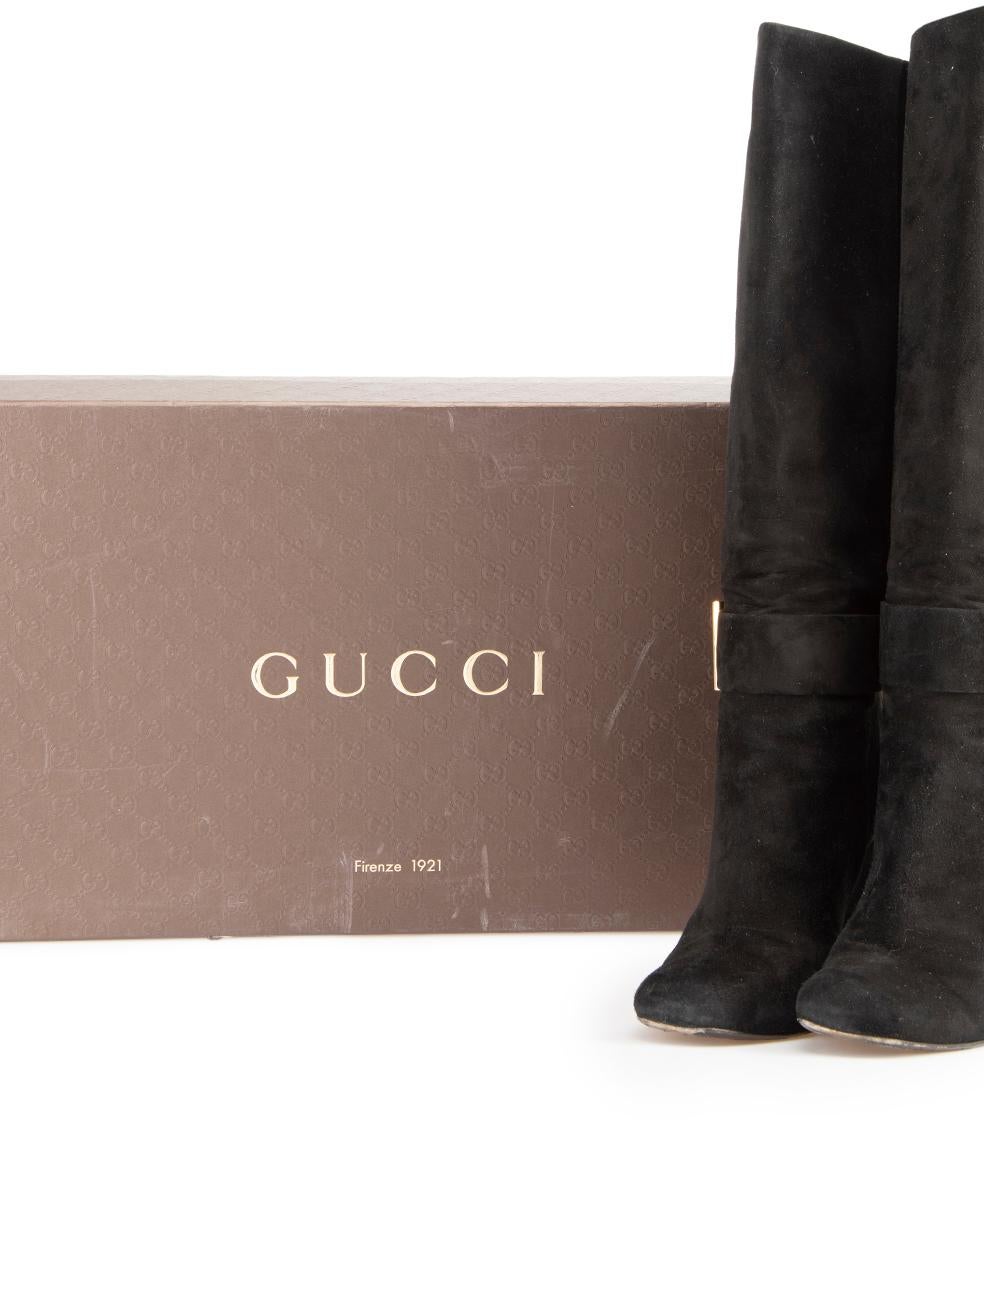 Gucci Women's Black Suede Buckle Detail Knee High Boots 3